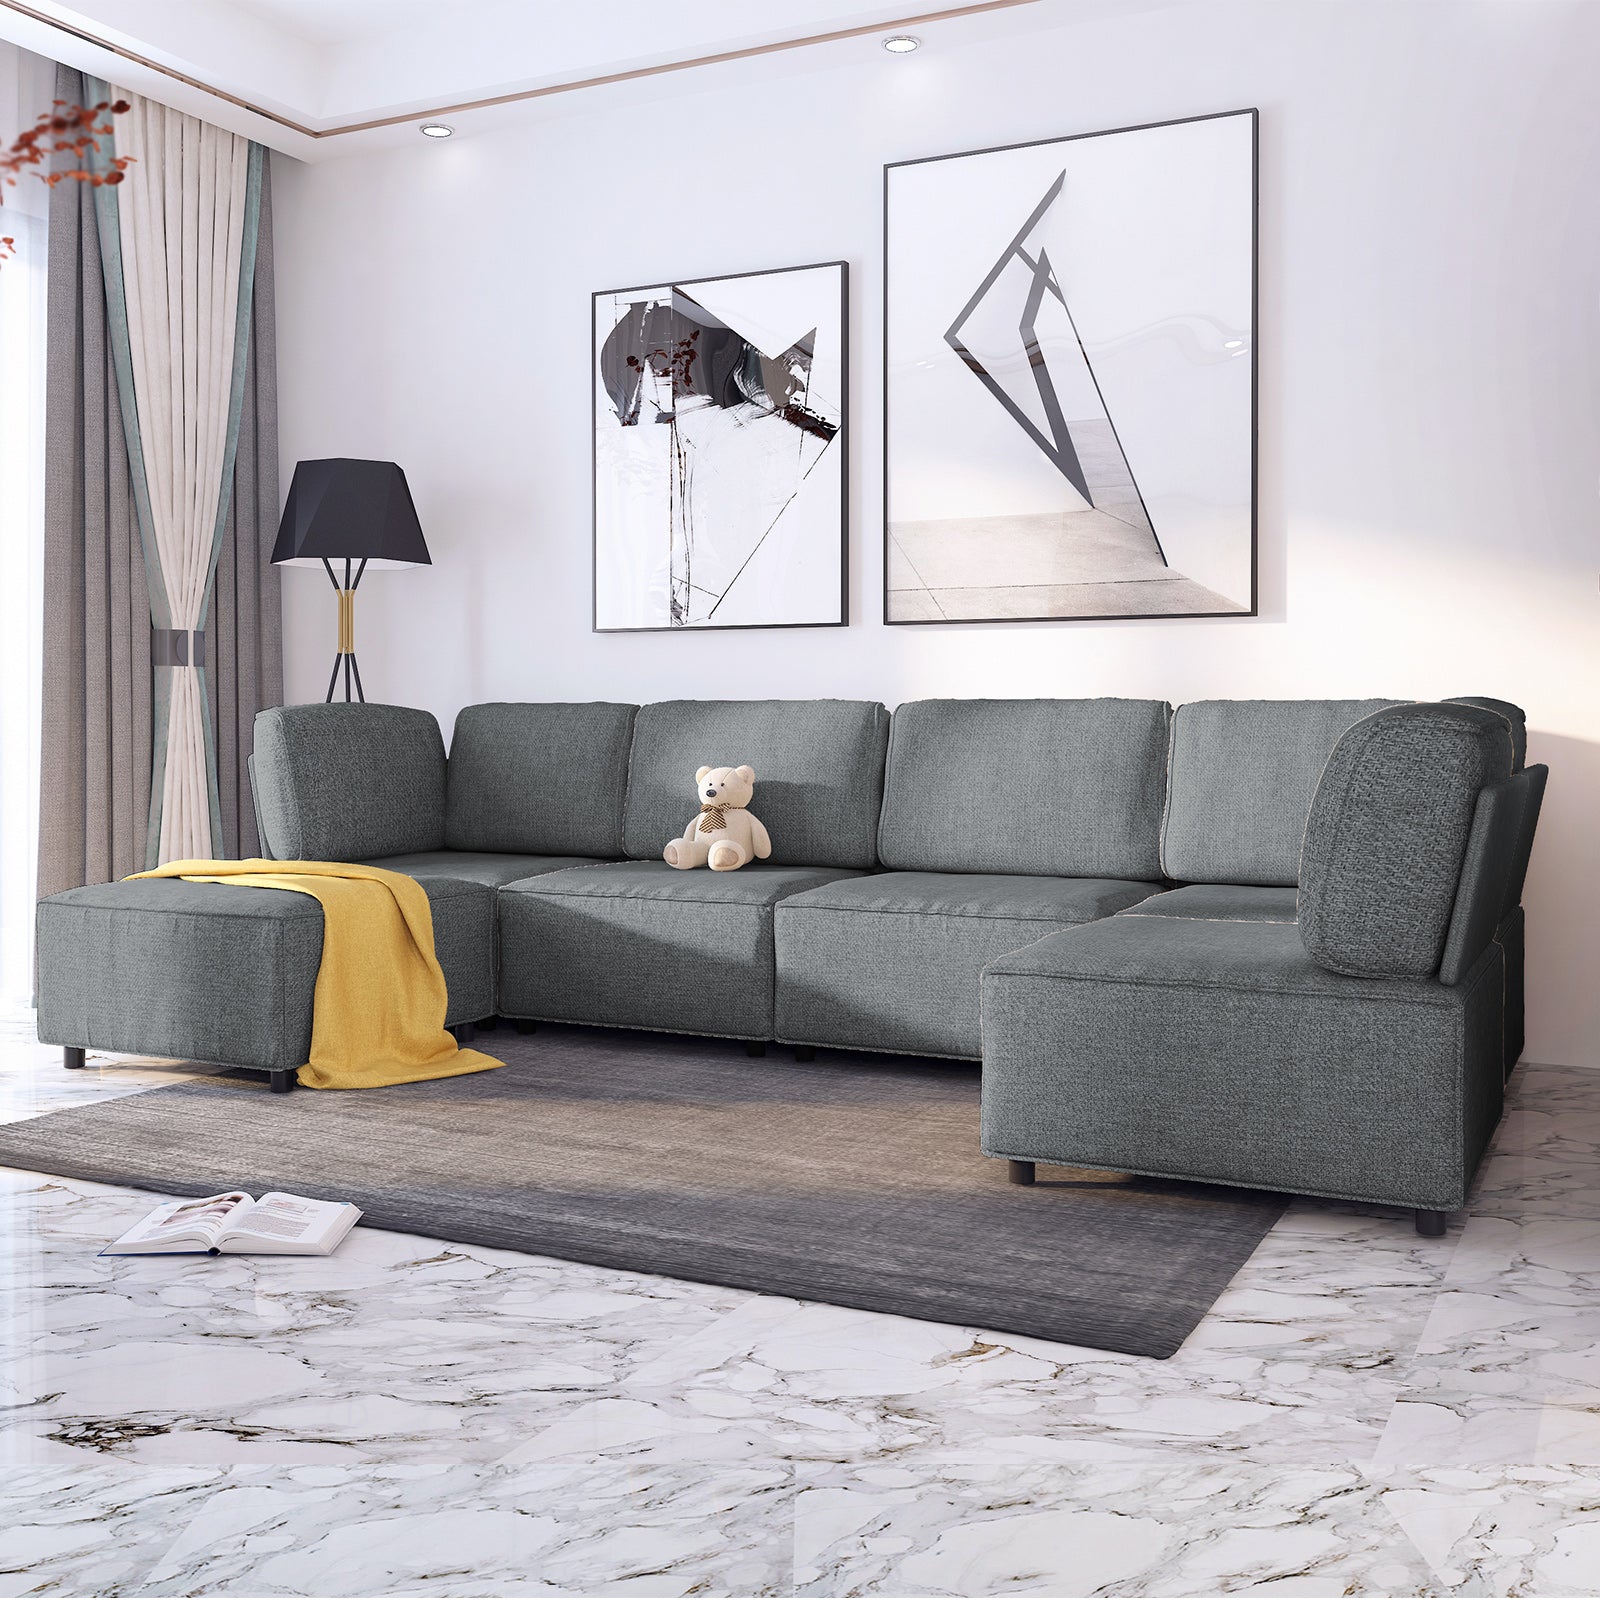 Cecer U/L Shaped Modular Convertible Sectional Sofa with Ottoman